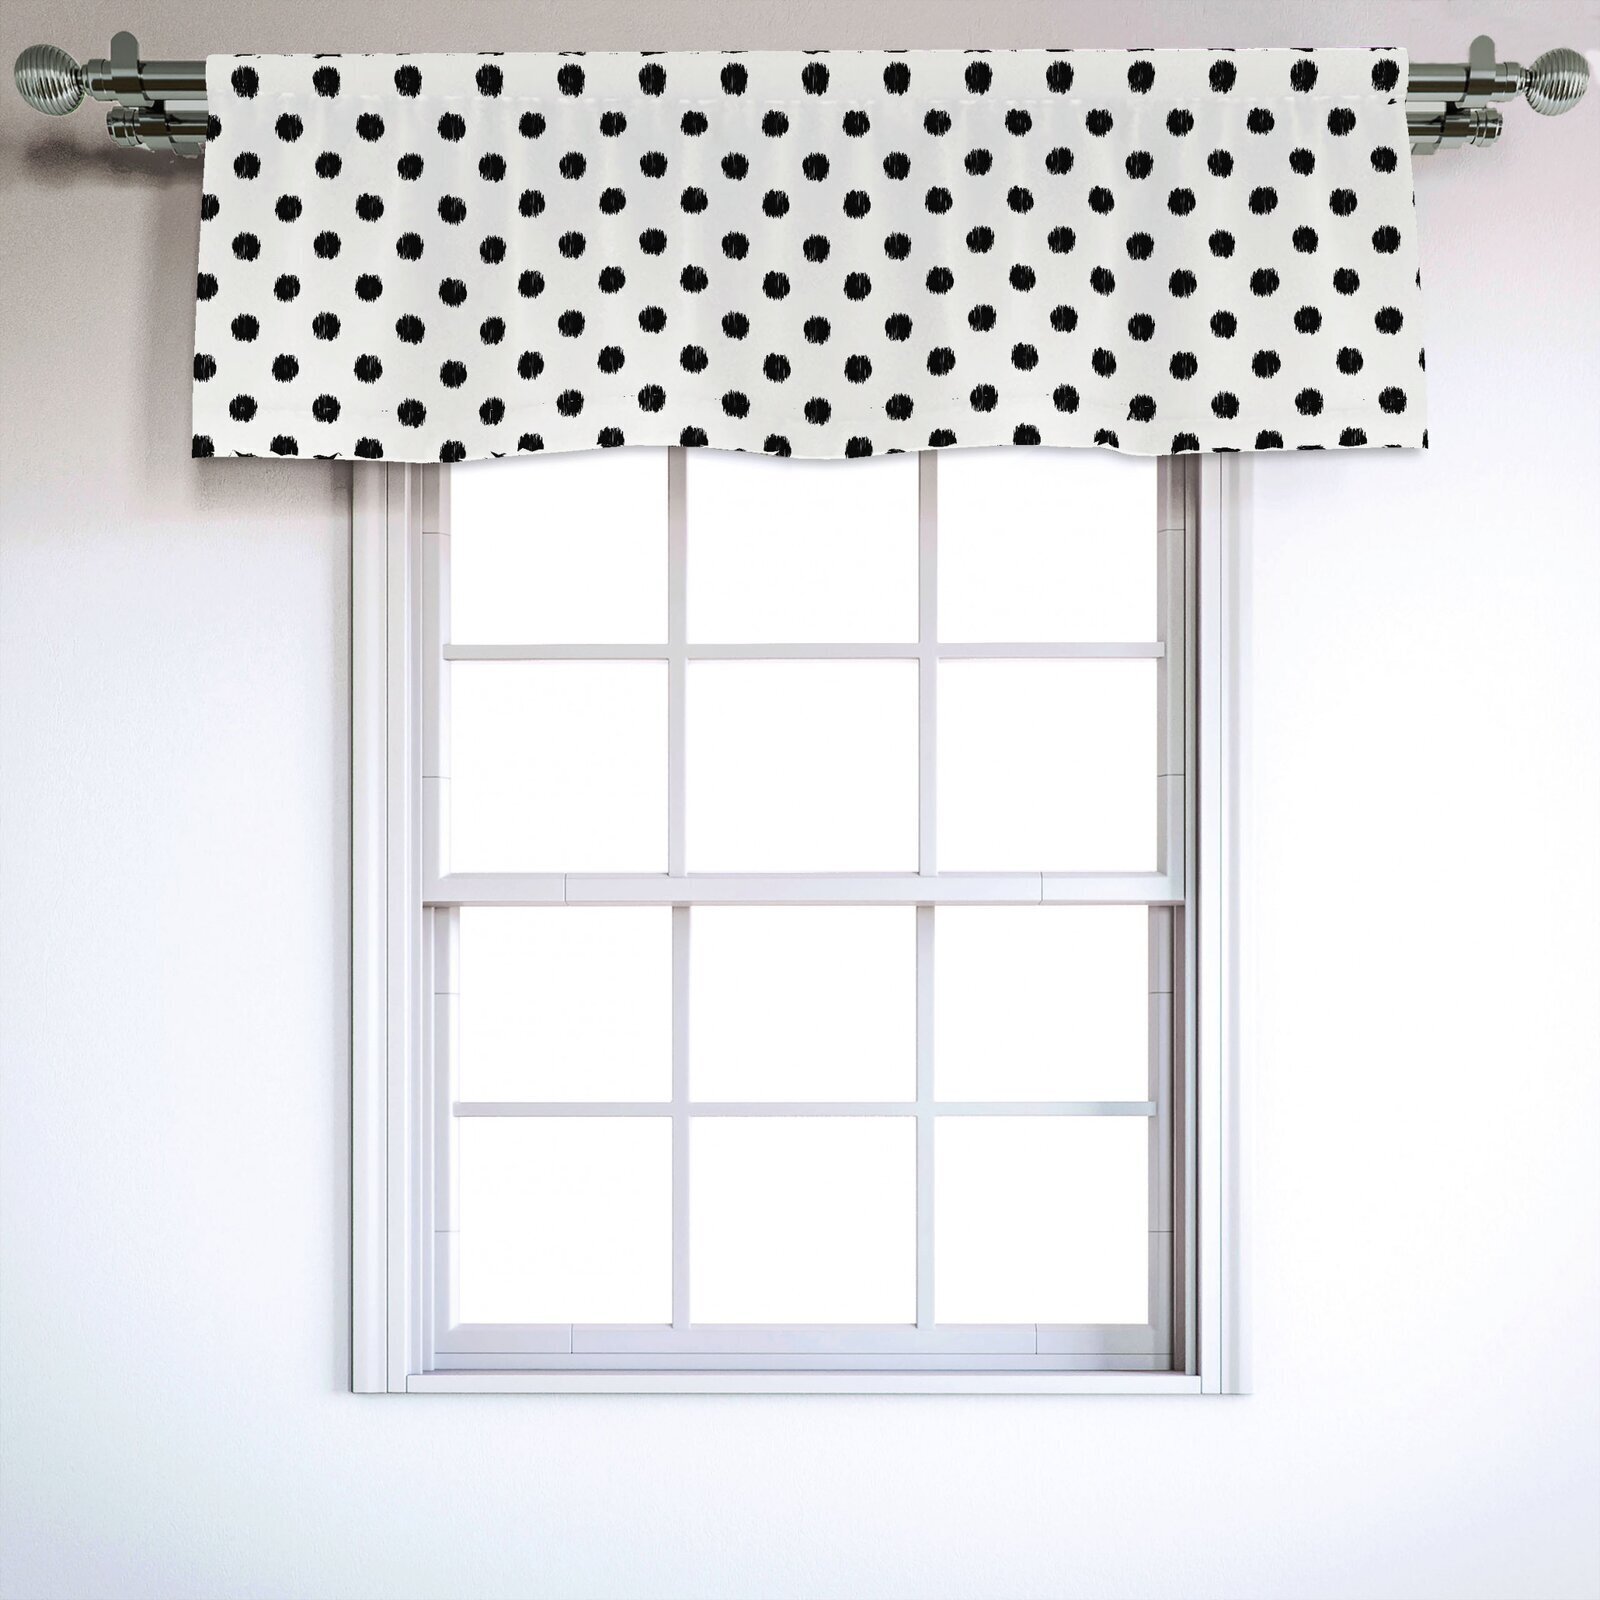 1pr Black with Pink polka dots valances Each piece is 42x14...total is 84x14 